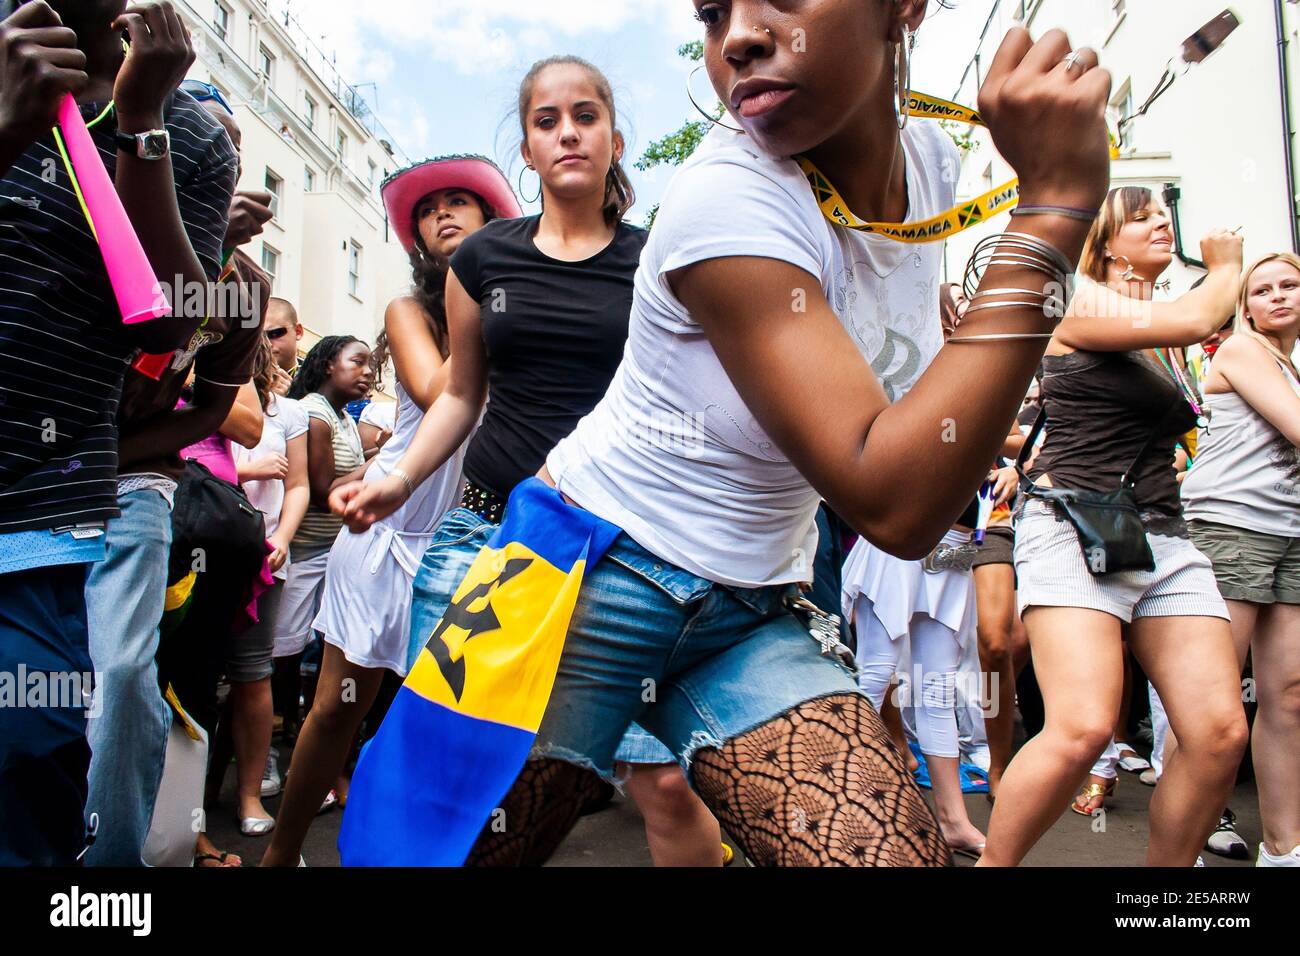 Pretty girl dancing at Notting Hill Carnival Stock Photo